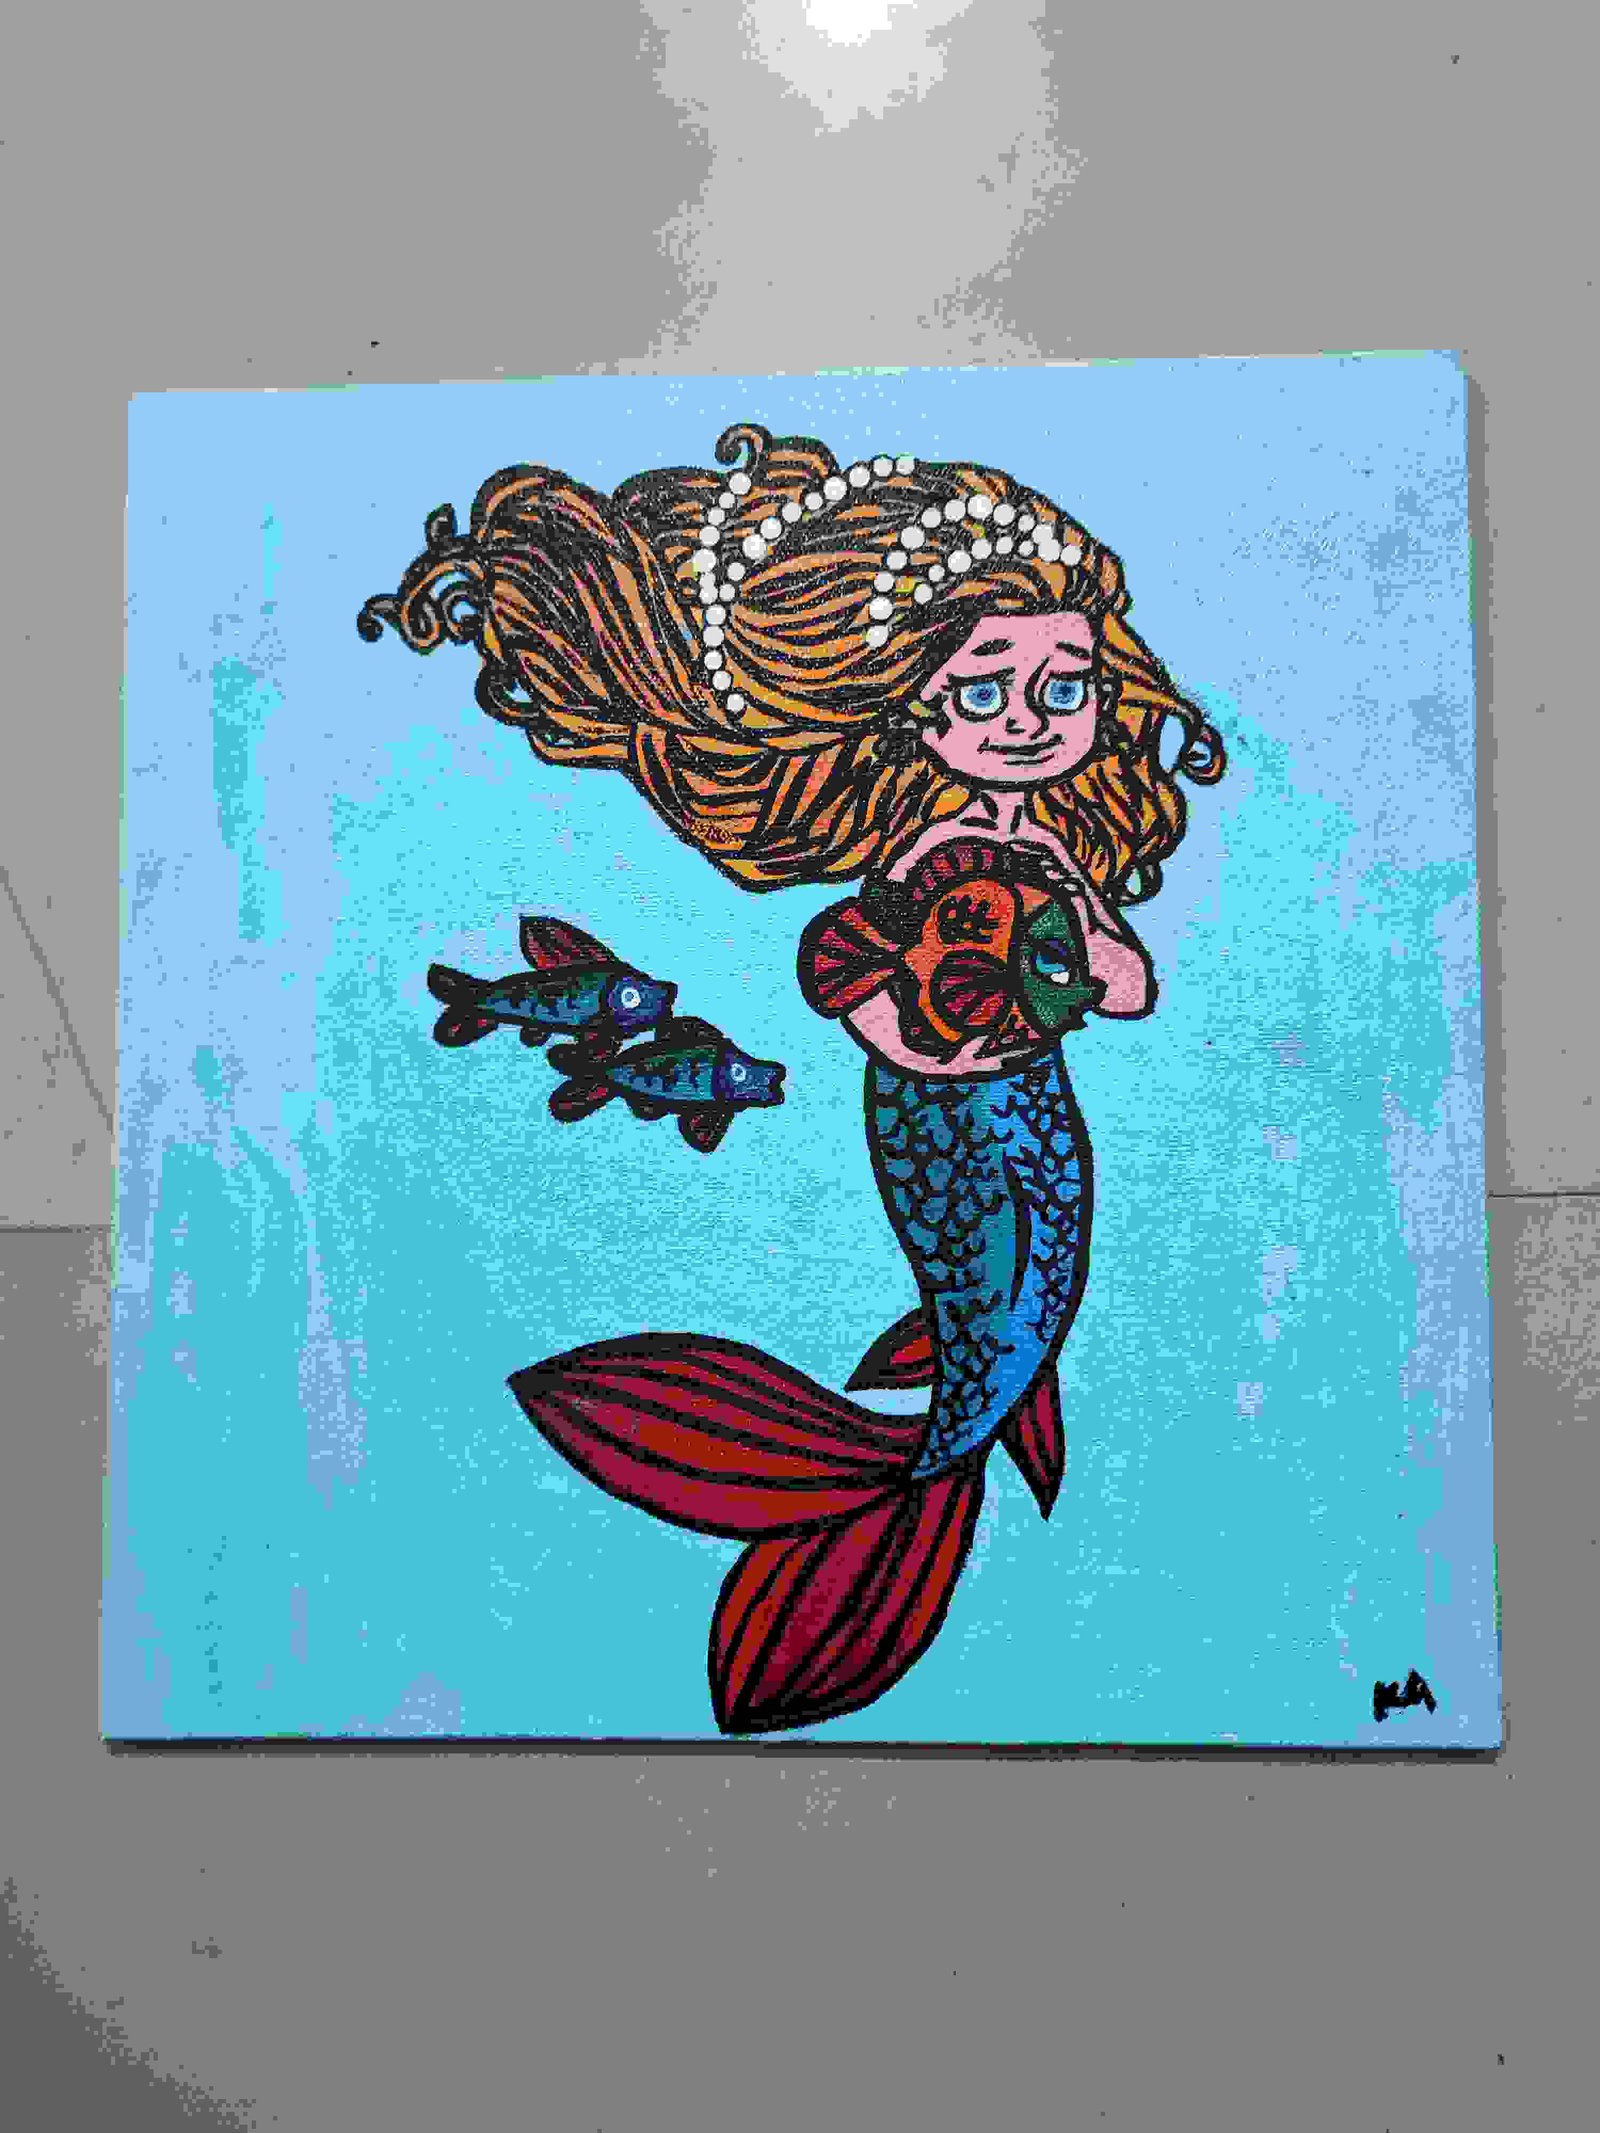 Painting Of Mermaid In Acrylic Painting Size 3030 Sq Cm Pric